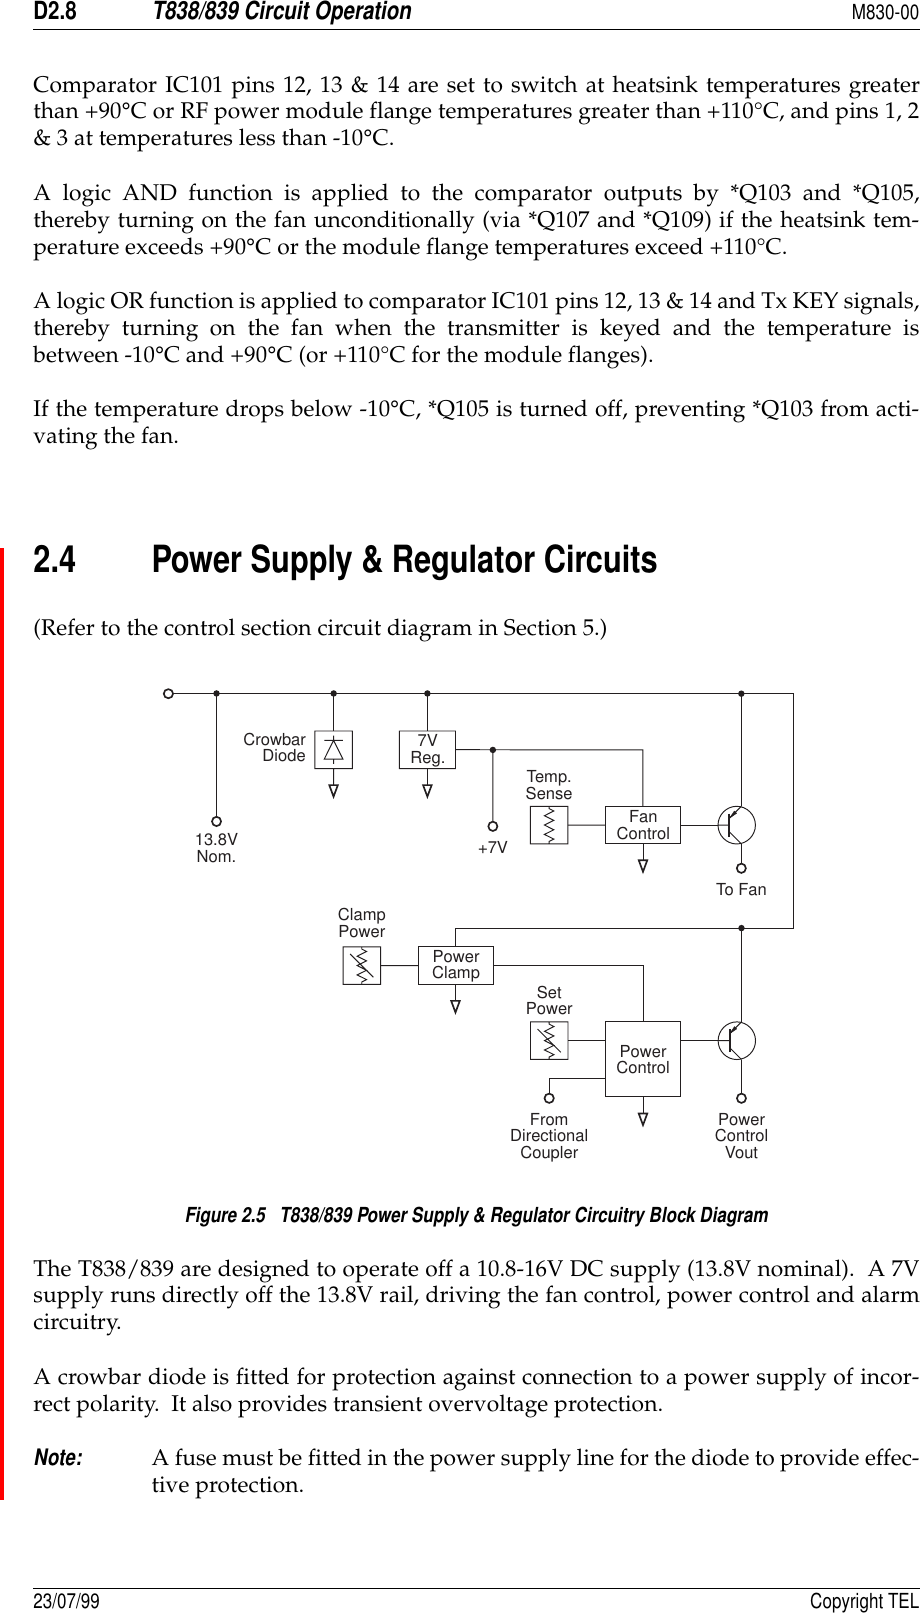 D2.8T838/839 Circuit OperationM830-0023/07/99 Copyright TELComparator IC101 pins 12, 13 &amp; 14 are set to switch at heatsink temperatures greaterthan +90°C or RF power module flange temperatures greater than +110°C, and pins 1, 2&amp; 3 at temperatures less than -10°C.A logic AND function is applied to the comparator outputs by *Q103 and *Q105,thereby turning on the fan unconditionally (via *Q107 and *Q109) if the heatsink tem-perature exceeds +90°C or the module flange temperatures exceed +110°C.A logic OR function is applied to comparator IC101 pins 12, 13 &amp; 14 and Tx KEY signals,thereby turning on the fan when the transmitter is keyed and the temperature isbetween -10°C and +90°C (or +110°C for the module flanges).If the temperature drops below -10°C, *Q105 is turned off, preventing *Q103 from acti-vating the fan.2.4 Power Supply &amp; Regulator Circuits(Refer to the control section circuit diagram in Section 5.)Figure 2.5   T838/839 Power Supply &amp; Regulator Circuitry Block DiagramThe T838/839 are designed to operate off a 10.8-16V DC supply (13.8V nominal).  A 7Vsupply runs directly off the 13.8V rail, driving the fan control, power control and alarmcircuitry.A crowbar diode is fitted for protection against connection to a power supply of incor-rect polarity.  It also provides transient overvoltage protection.Note:A fuse must be fitted in the power supply line for the diode to provide effec-tive protection.7VReg.FanControlPowerClampPowerControlCrowbarDiodeTemp.SenseTo Fan+7VClampPowerFromDirectionalCouplerPowerControlVoutSetPower13.8VNom.